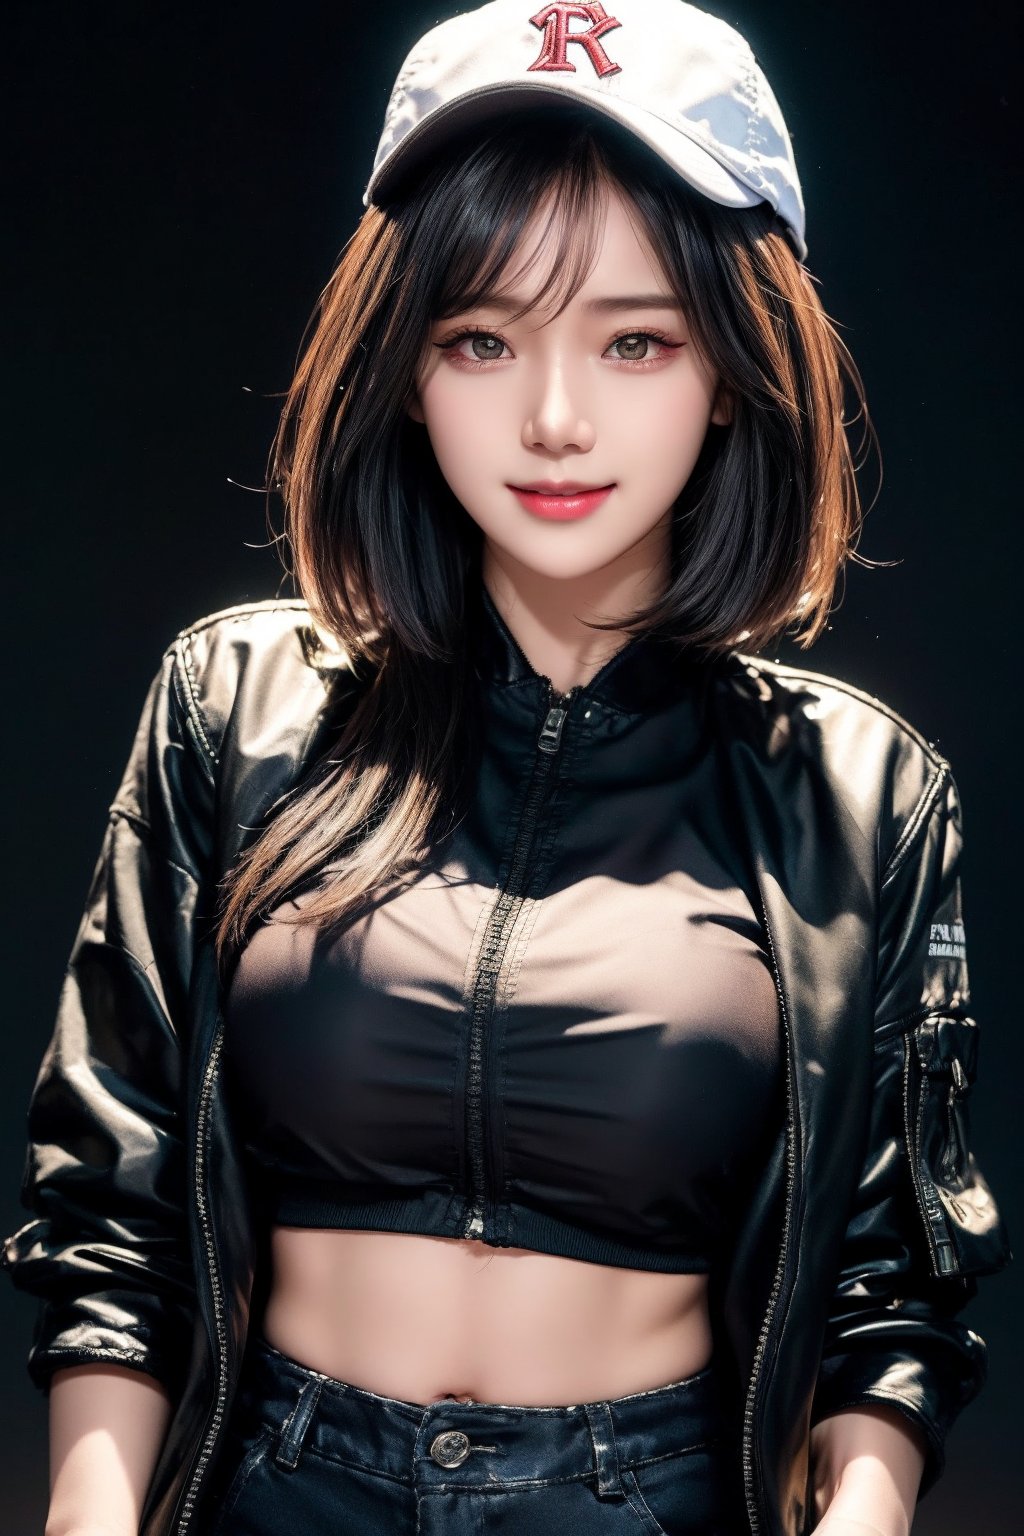 4k, best quality, masterpiece, 20yo 1girl, (cropped jacket),(demin pant), alluring smile, baseball cap, (Beautiful and detailed eyes), Detailed face, detailed eyes, double eyelids, thin face, real hands, muscular fit body, semi visible abs, ((short hair with long locks:1.2)), black hair, black background, real person, color splash style photo, IndoGirl
